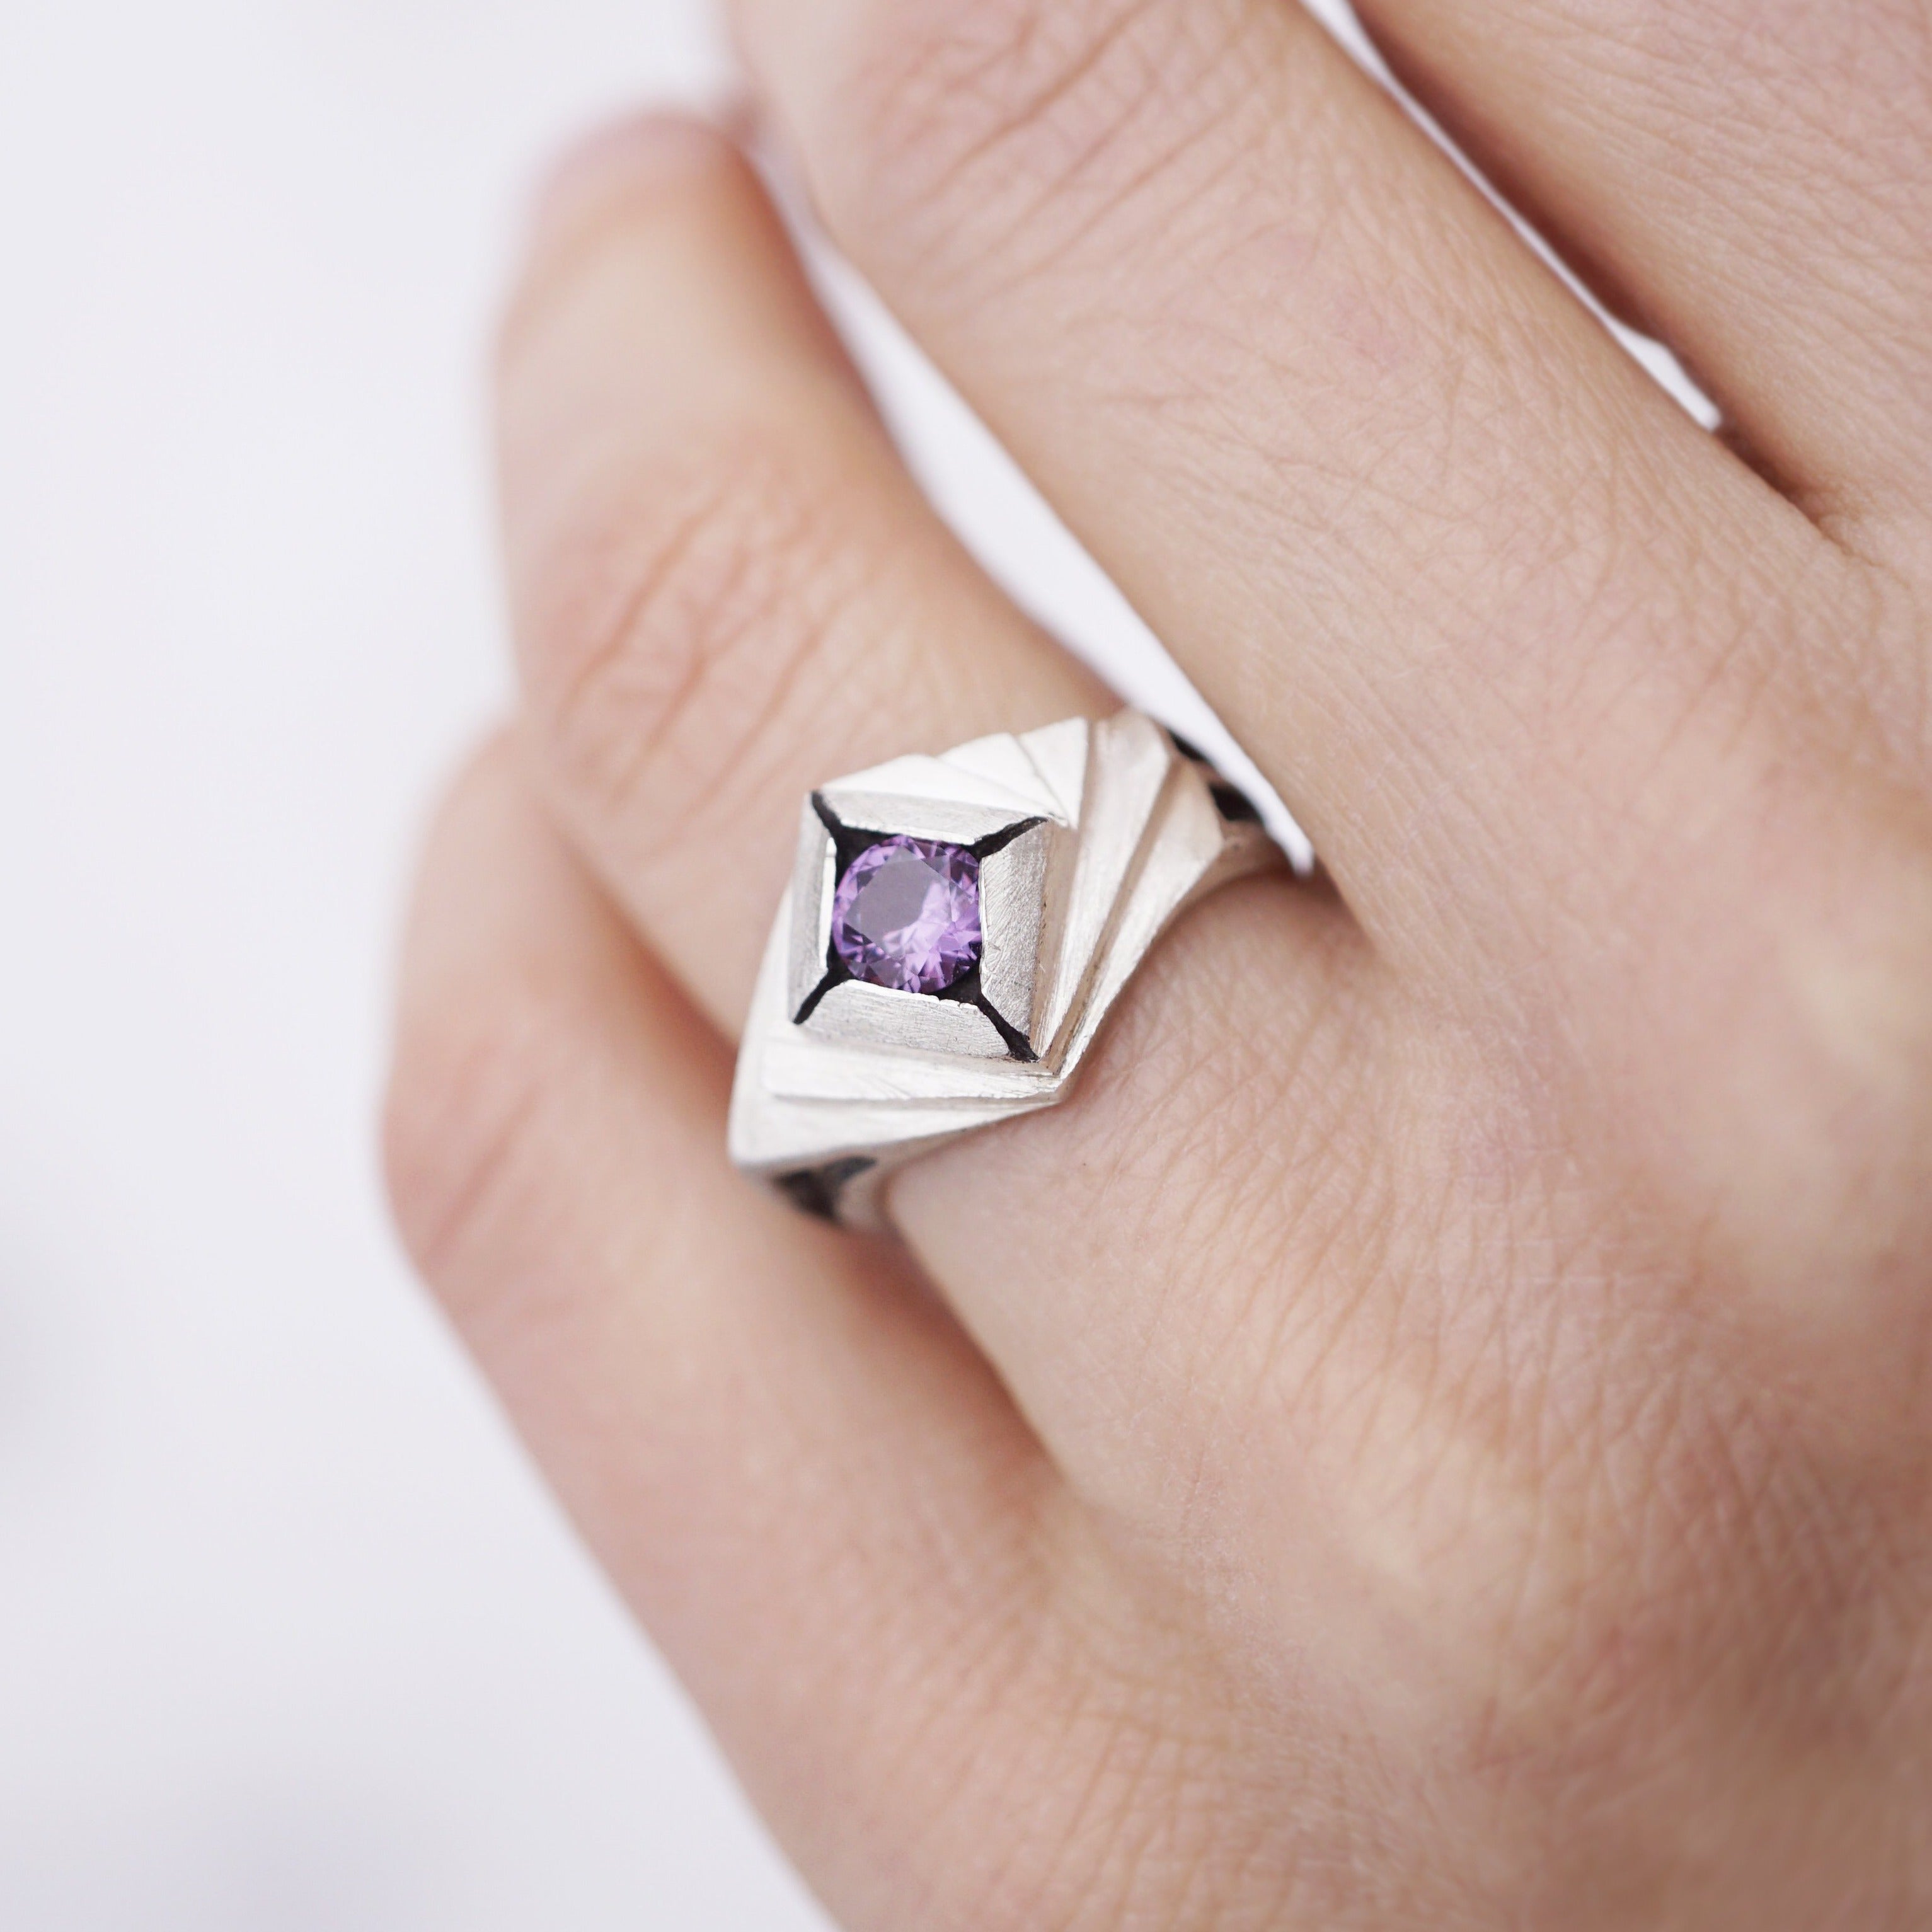 One of kind Statement Alexandrite ring from the sterling silver 